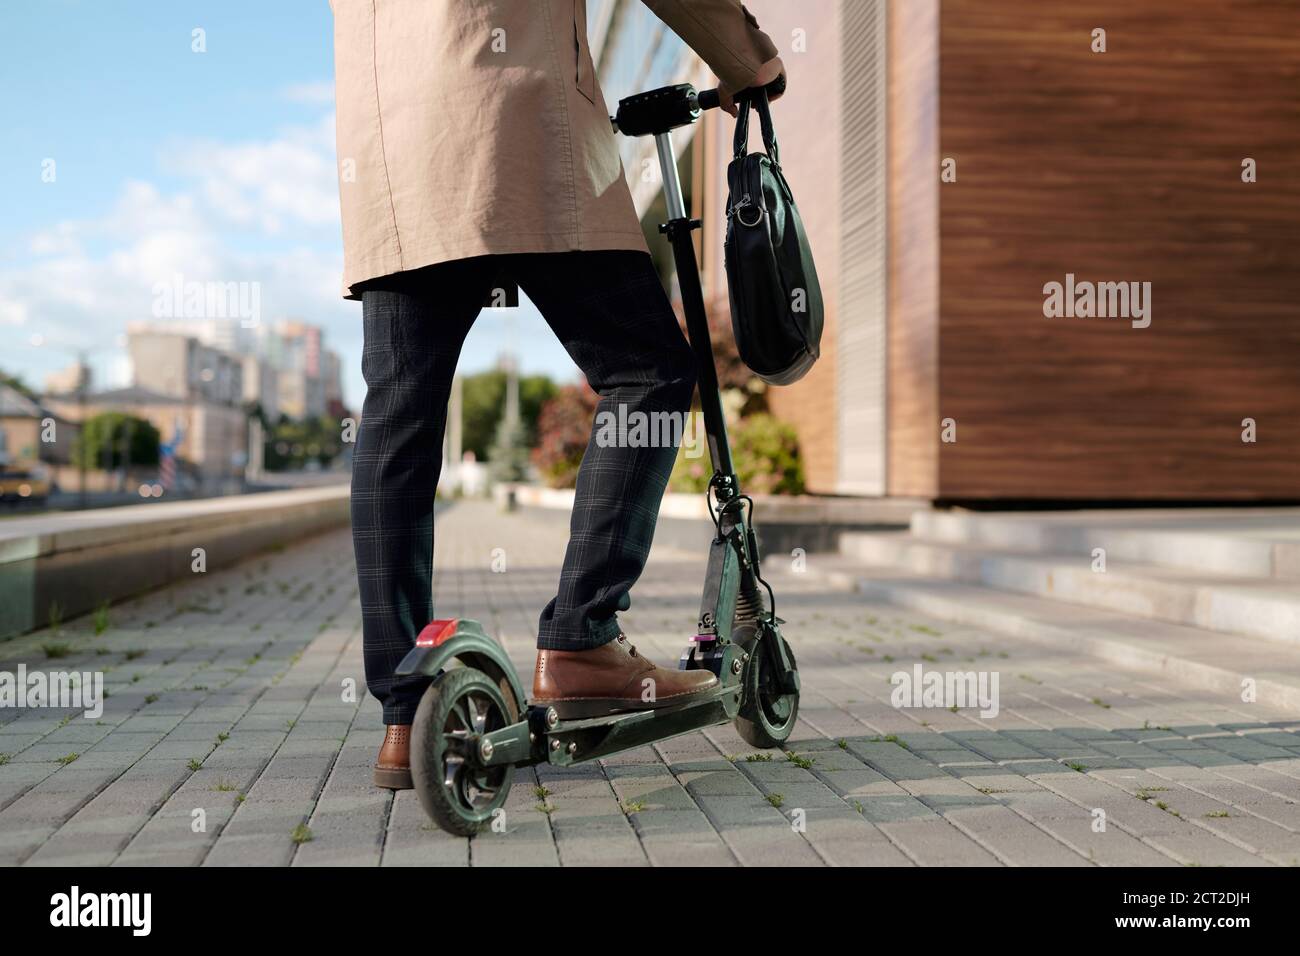 Low section of businessman in beige trenchcoat and pants standing on scooter Stock Photo